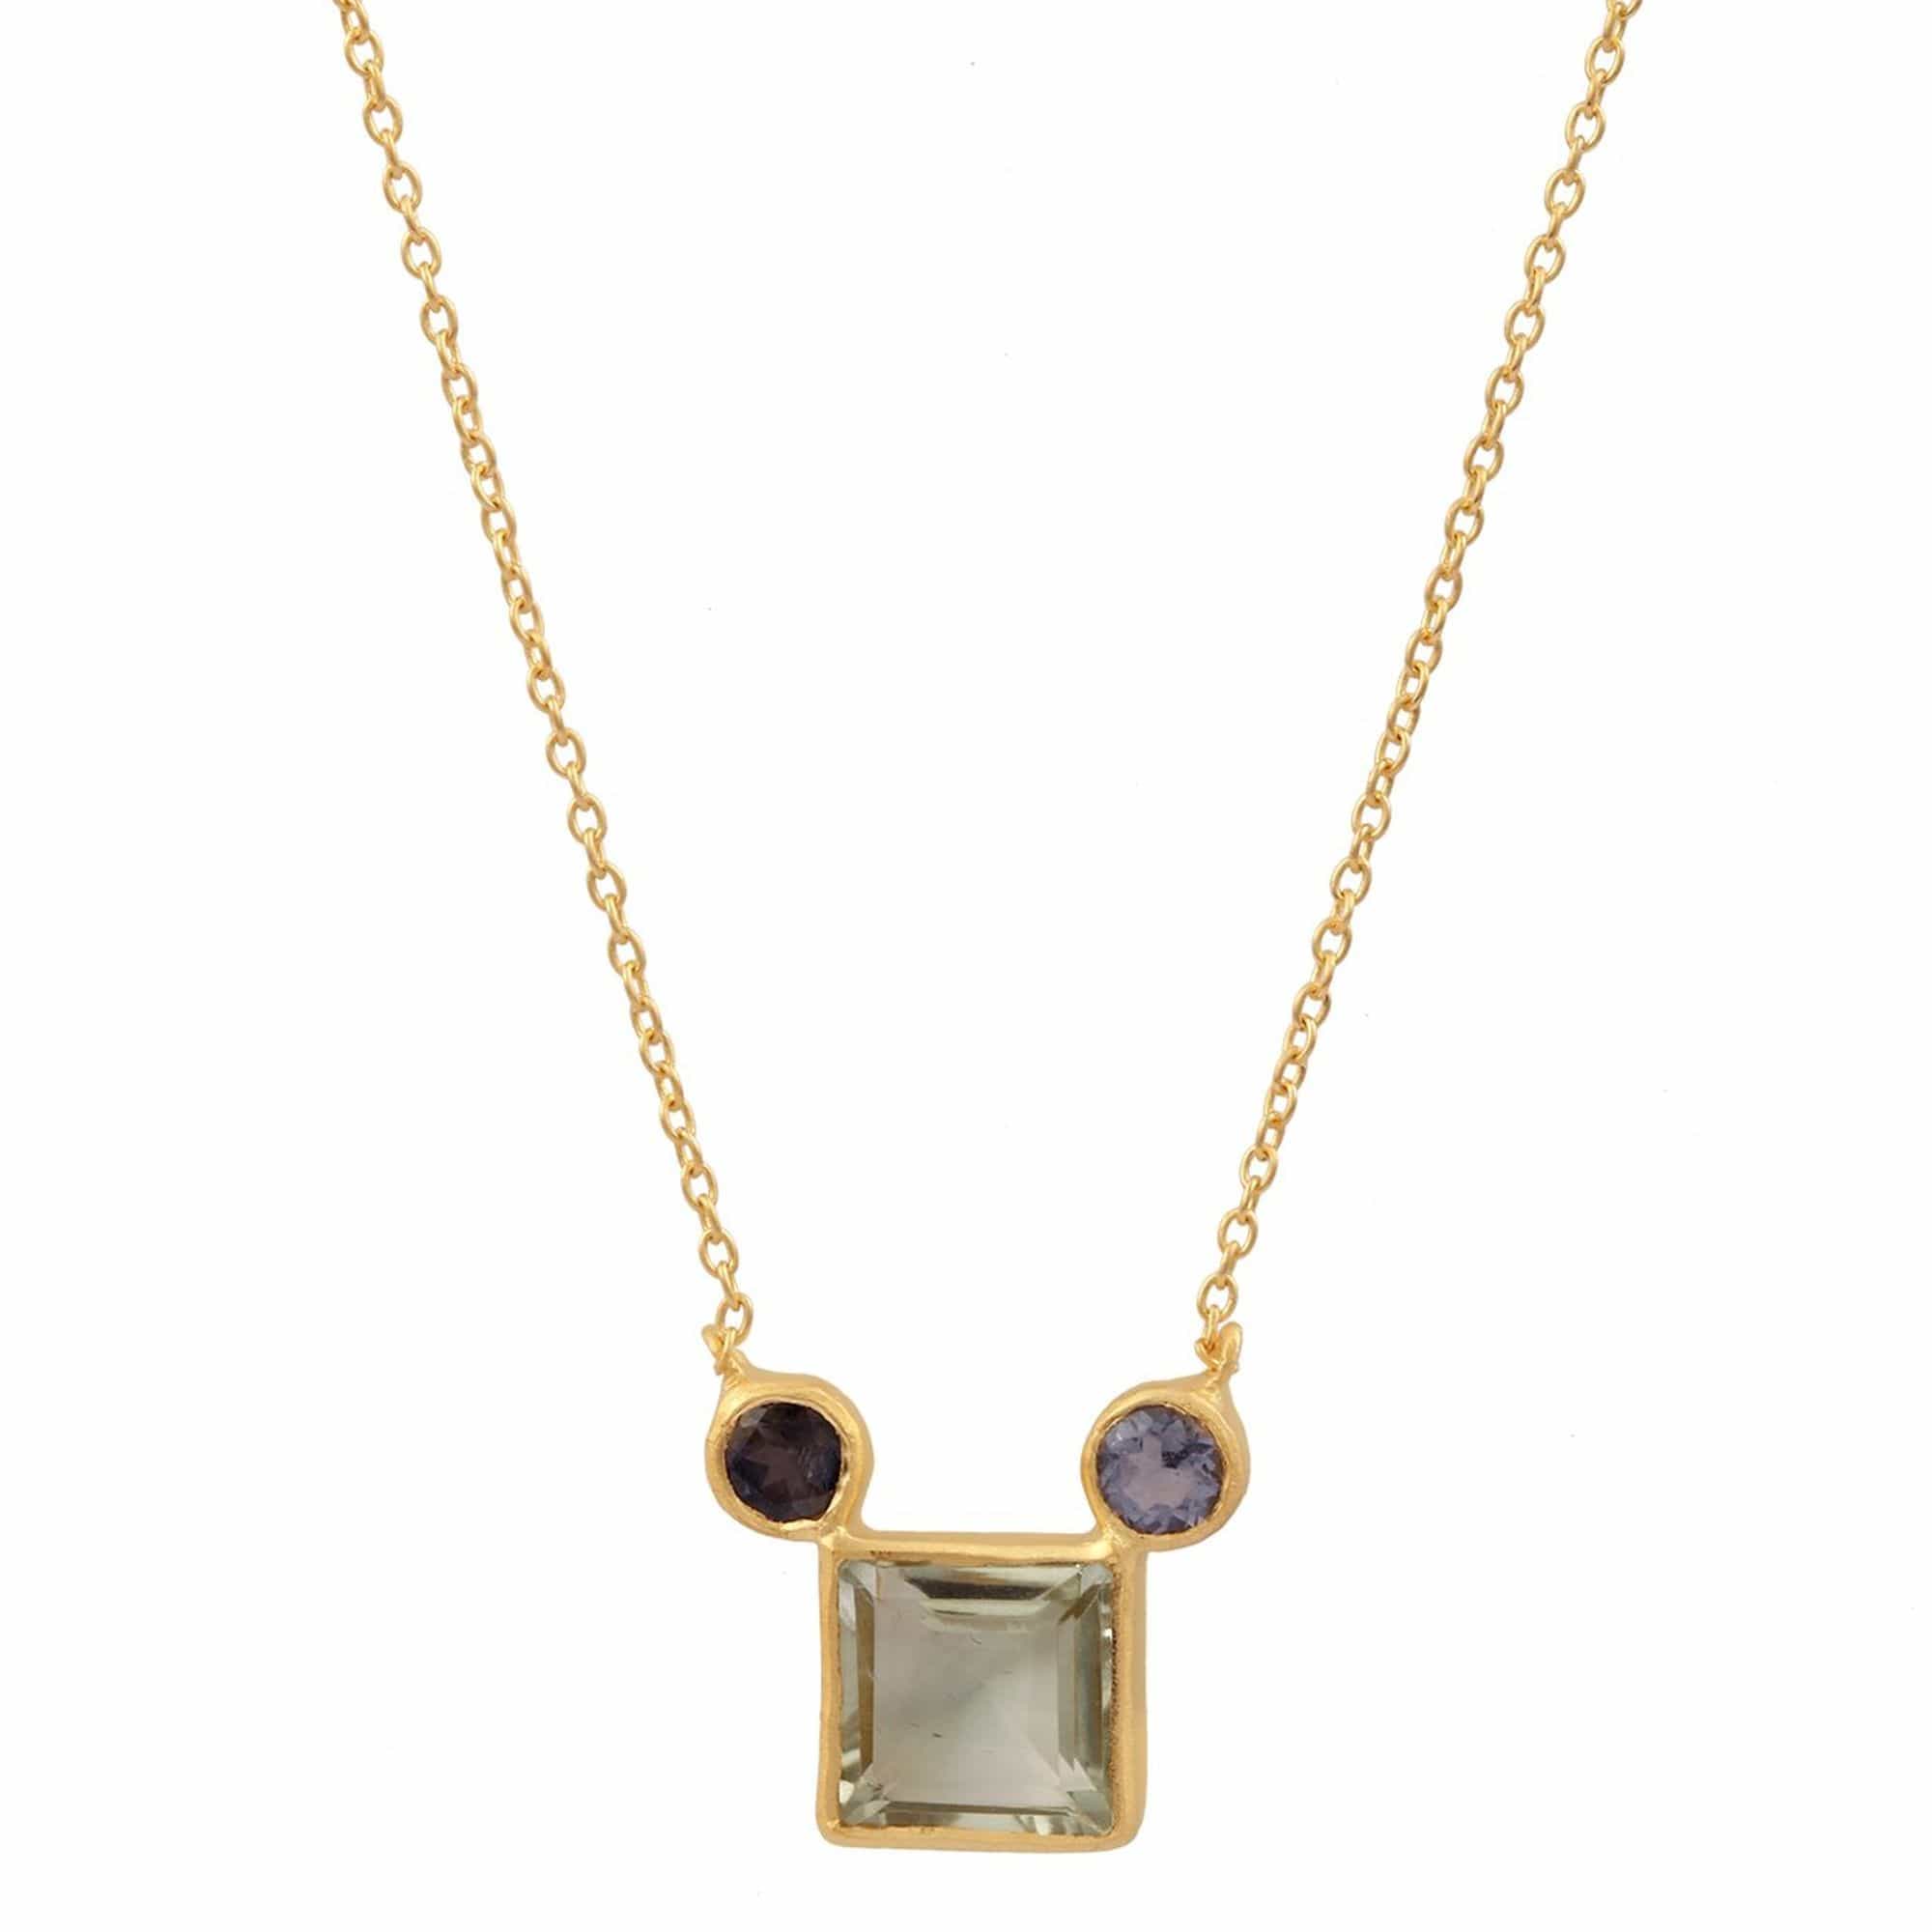 Natalia Rain Dot Necklace in Green Amethyst and Iolite